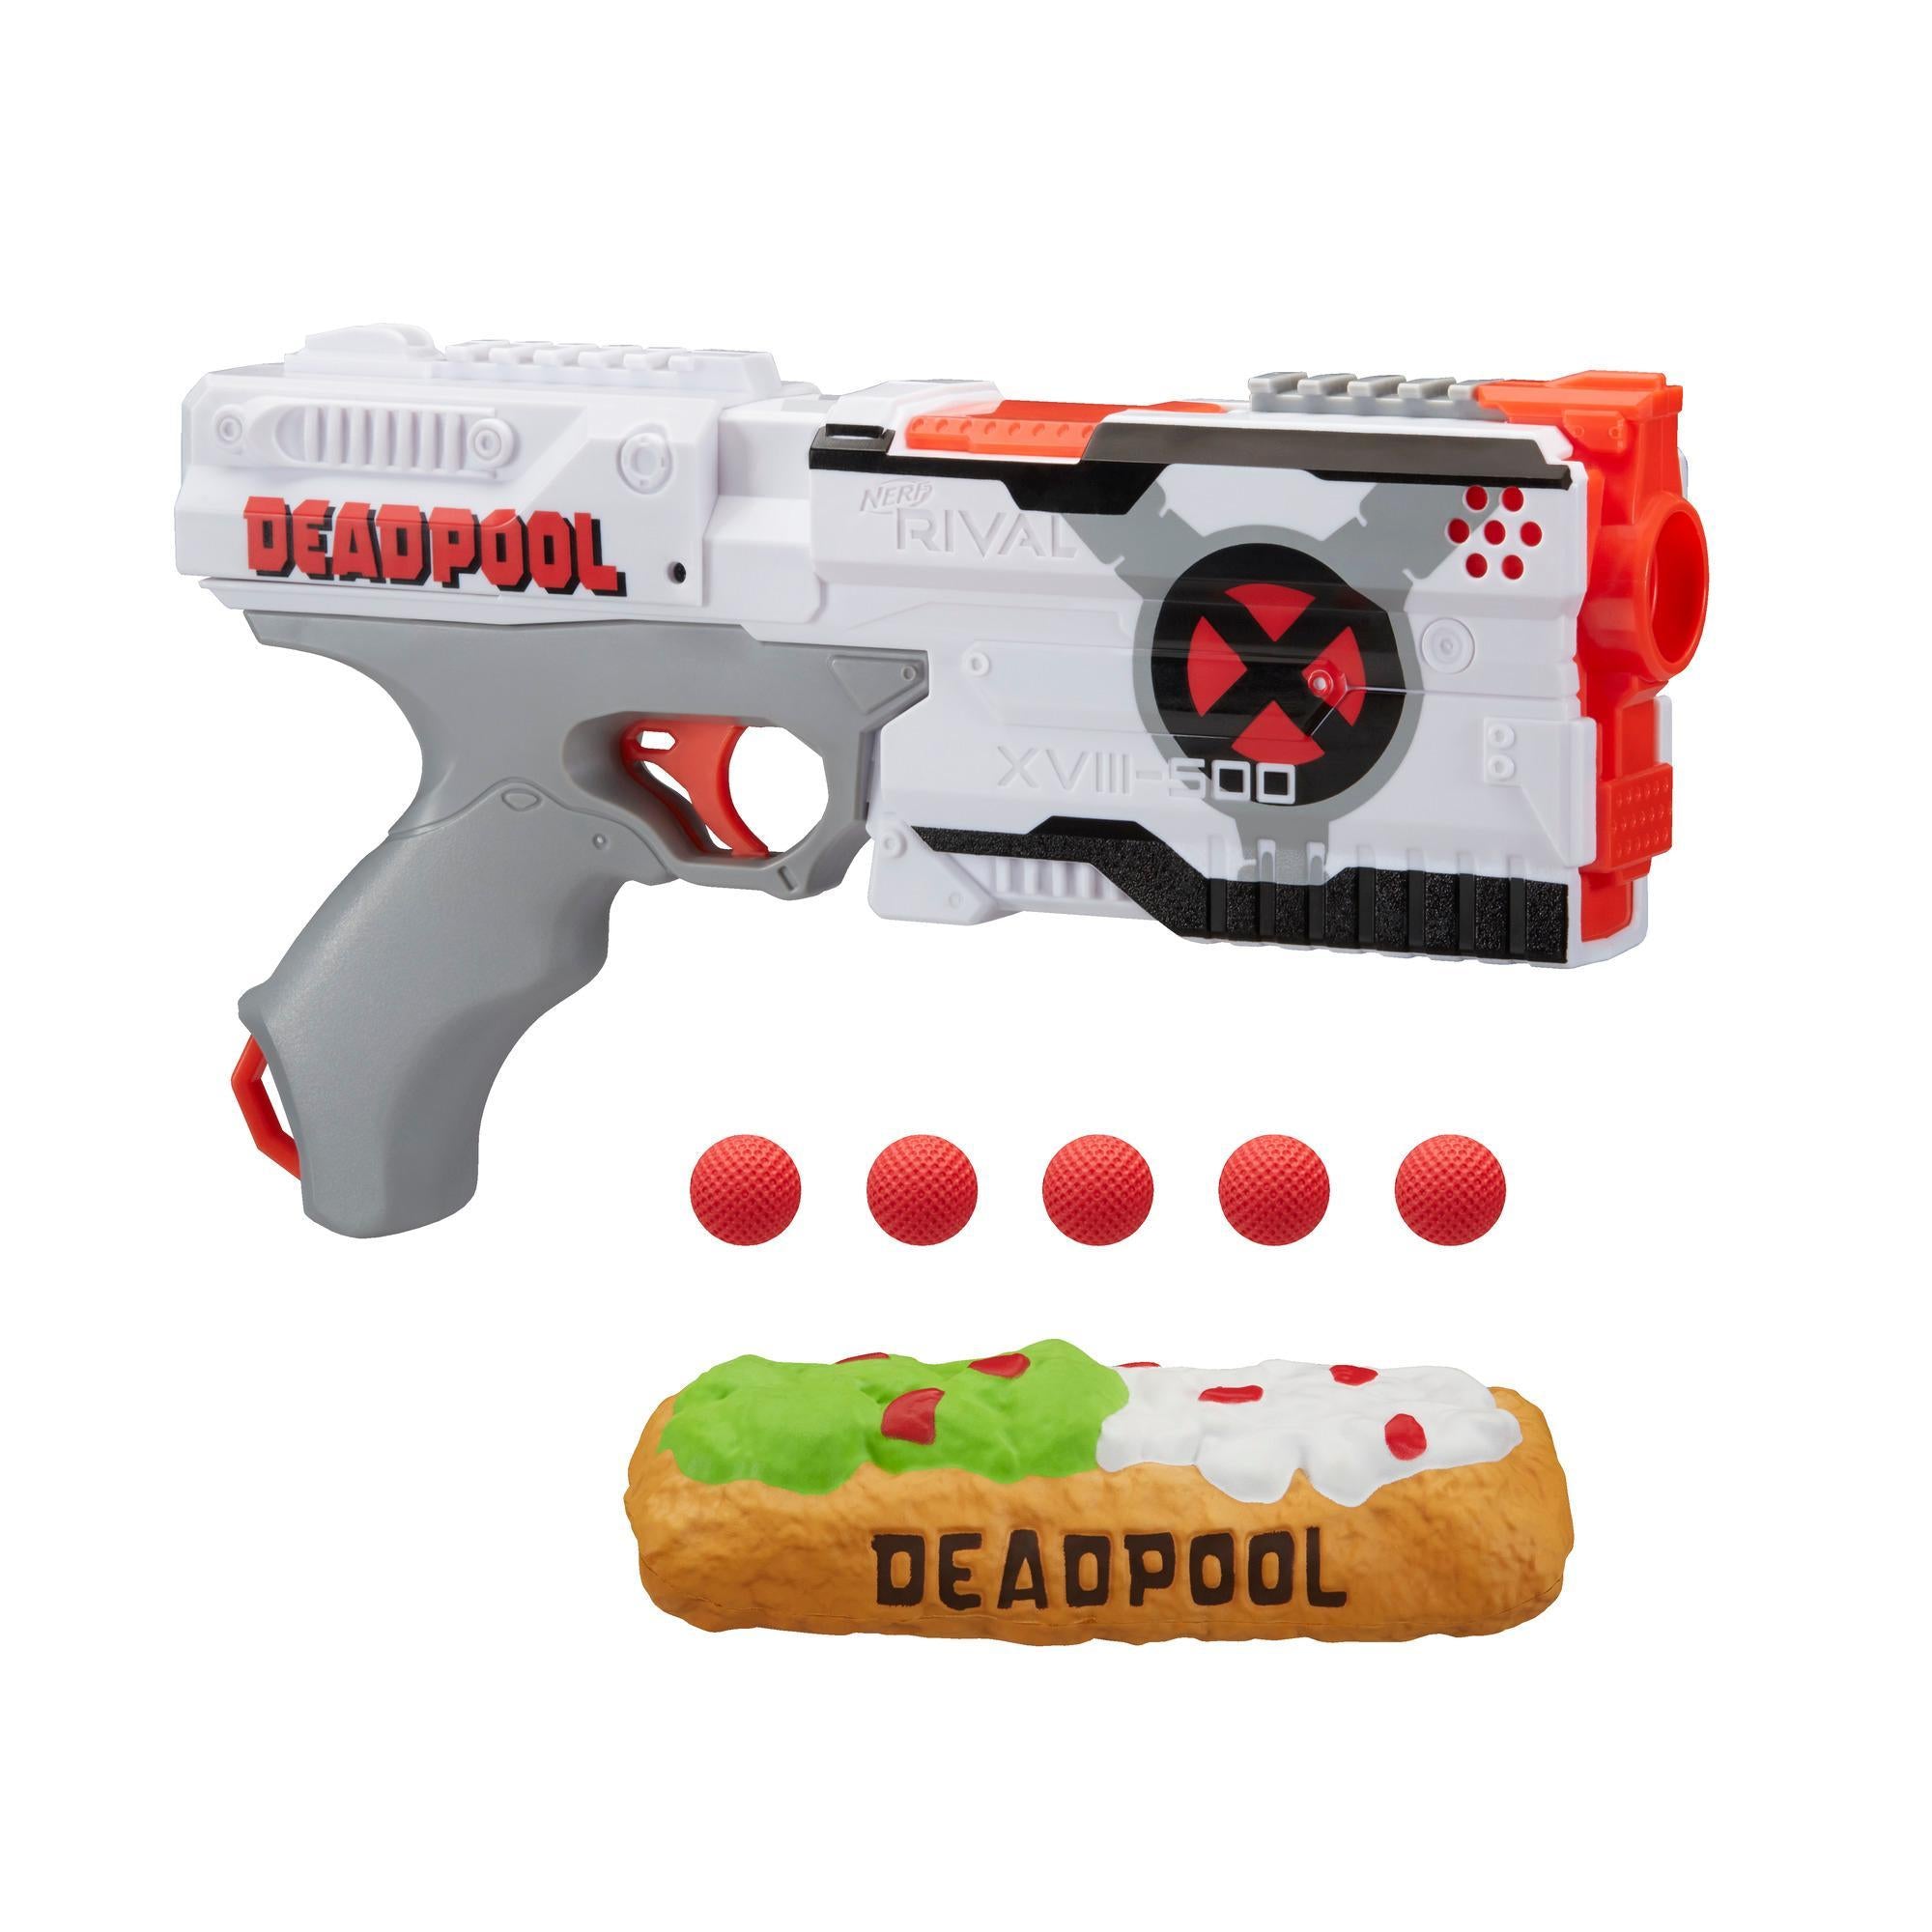 Deadpool Nerf Rival Blaster -- Kronos XVIII-500 with Deadpool X-Force Deco, Foam Chimichanga, 5 Nerf Rival Rounds - One Shop Online Toys in Pakistan